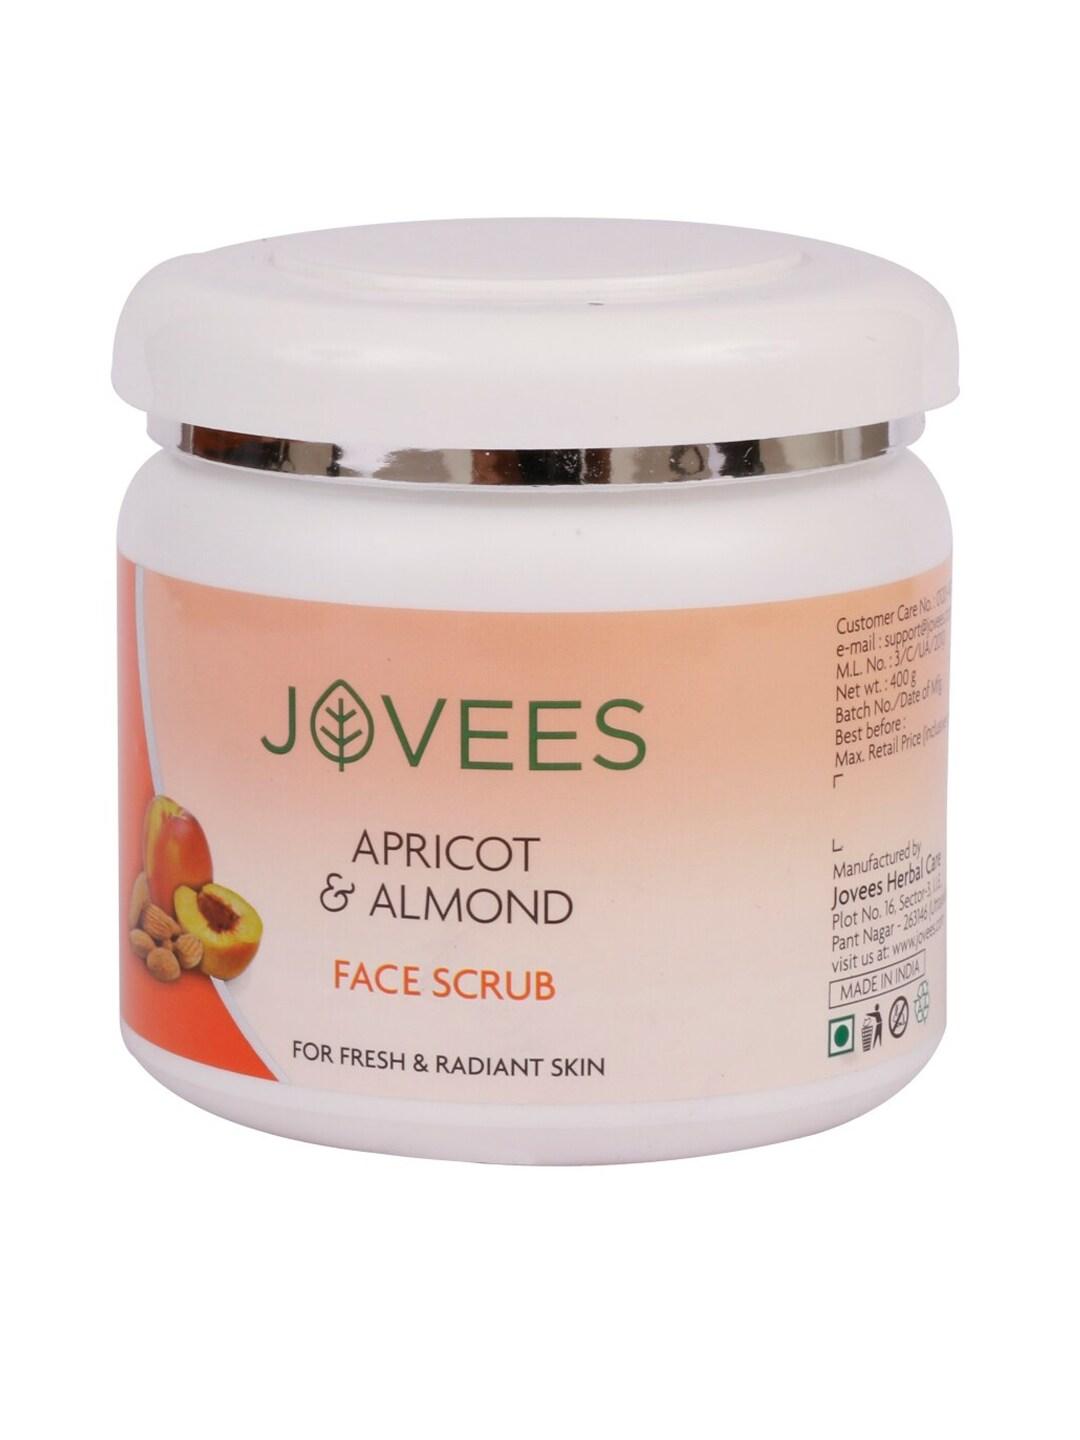 Jovees Apricot & Almond Face Scrub for Fresh & Radiant Skin - 400 g